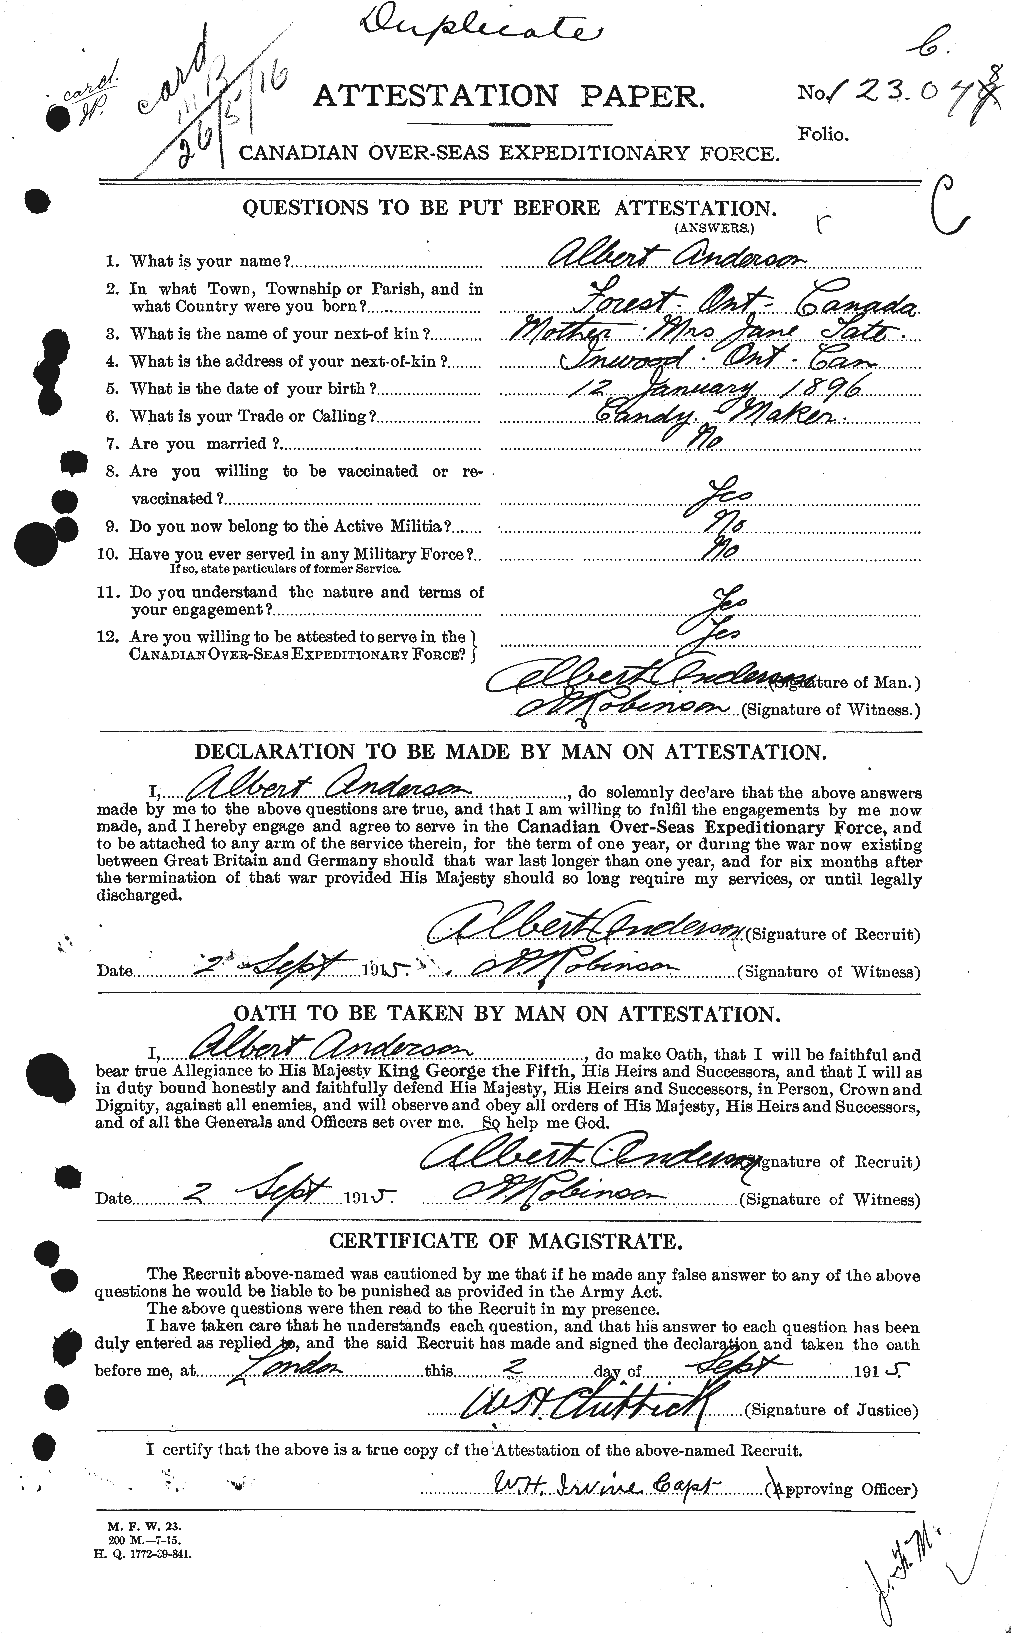 Personnel Records of the First World War - CEF 209558a